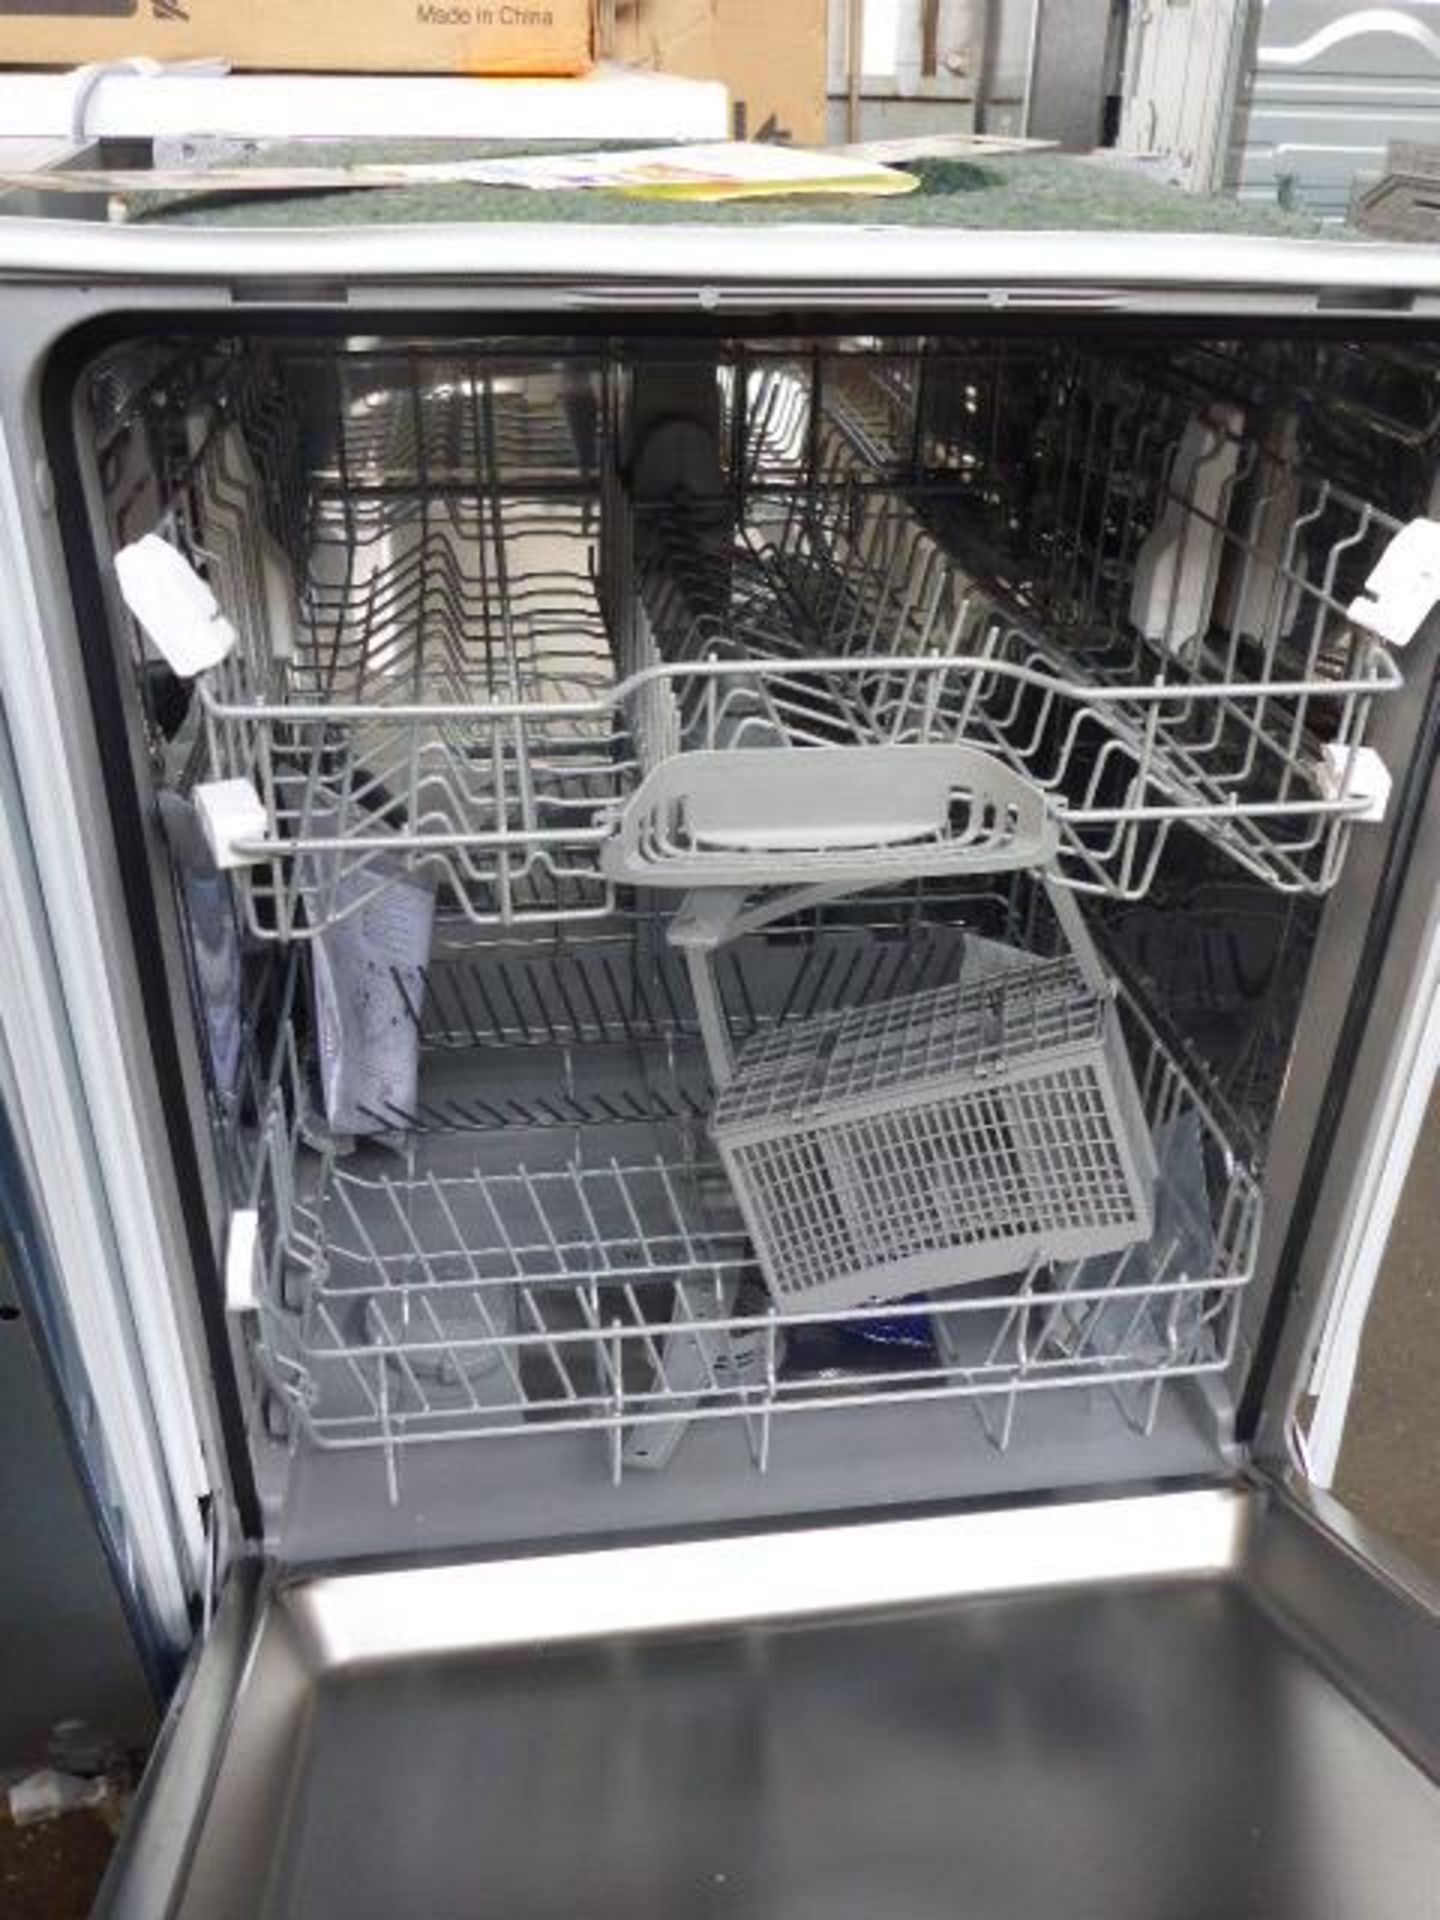 S41E50N1GBB Neff Dishwasher integrated stainless steel - Image 2 of 2